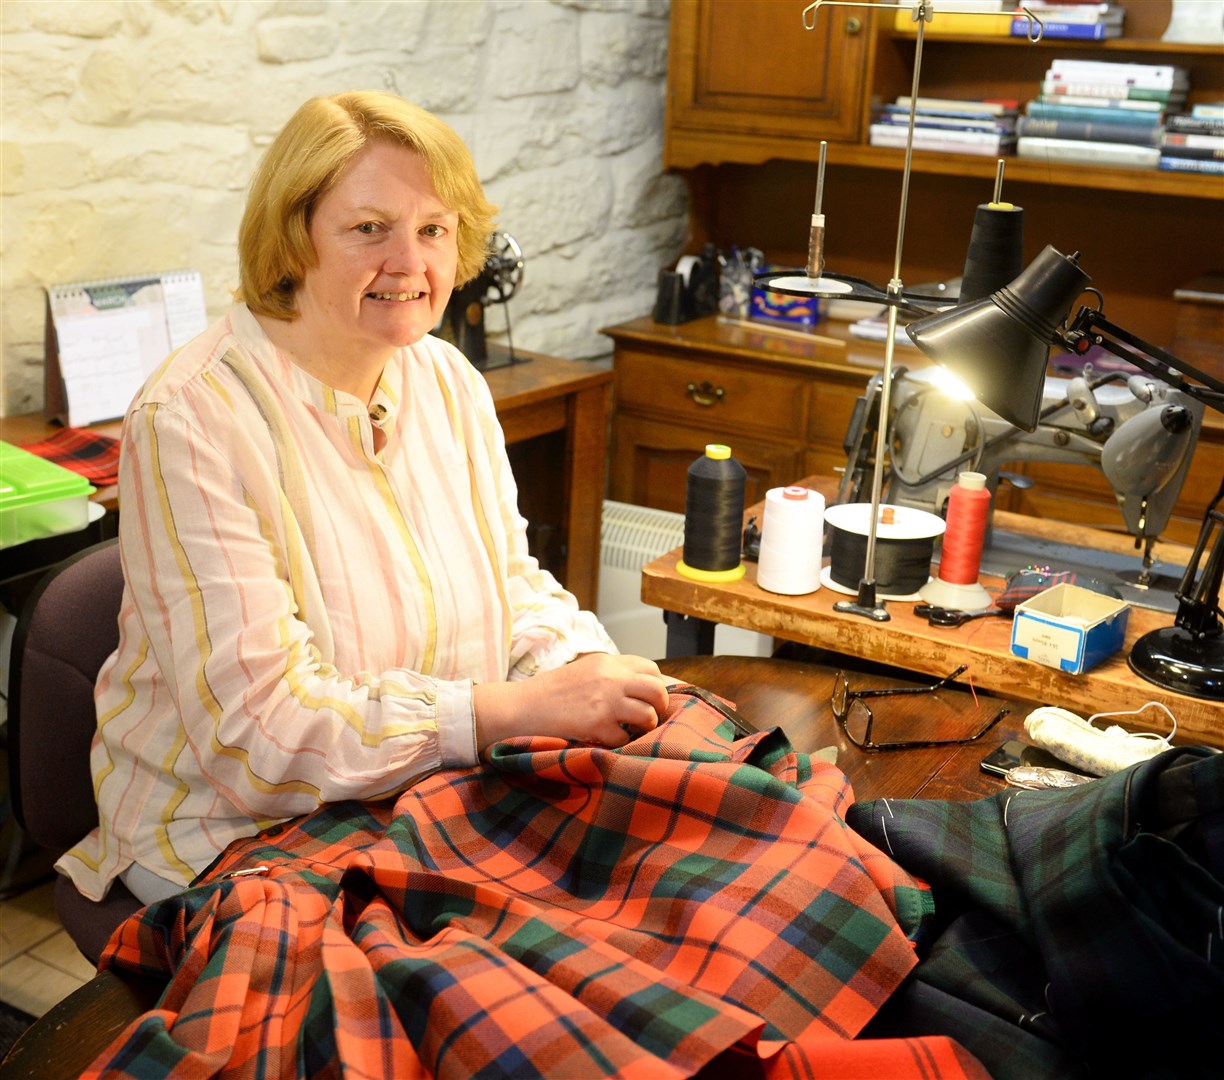 Irene Cathcart, who runs True Kiltmakers, made hundreds of masks on her own time to help out. Picture: Gary Anthony